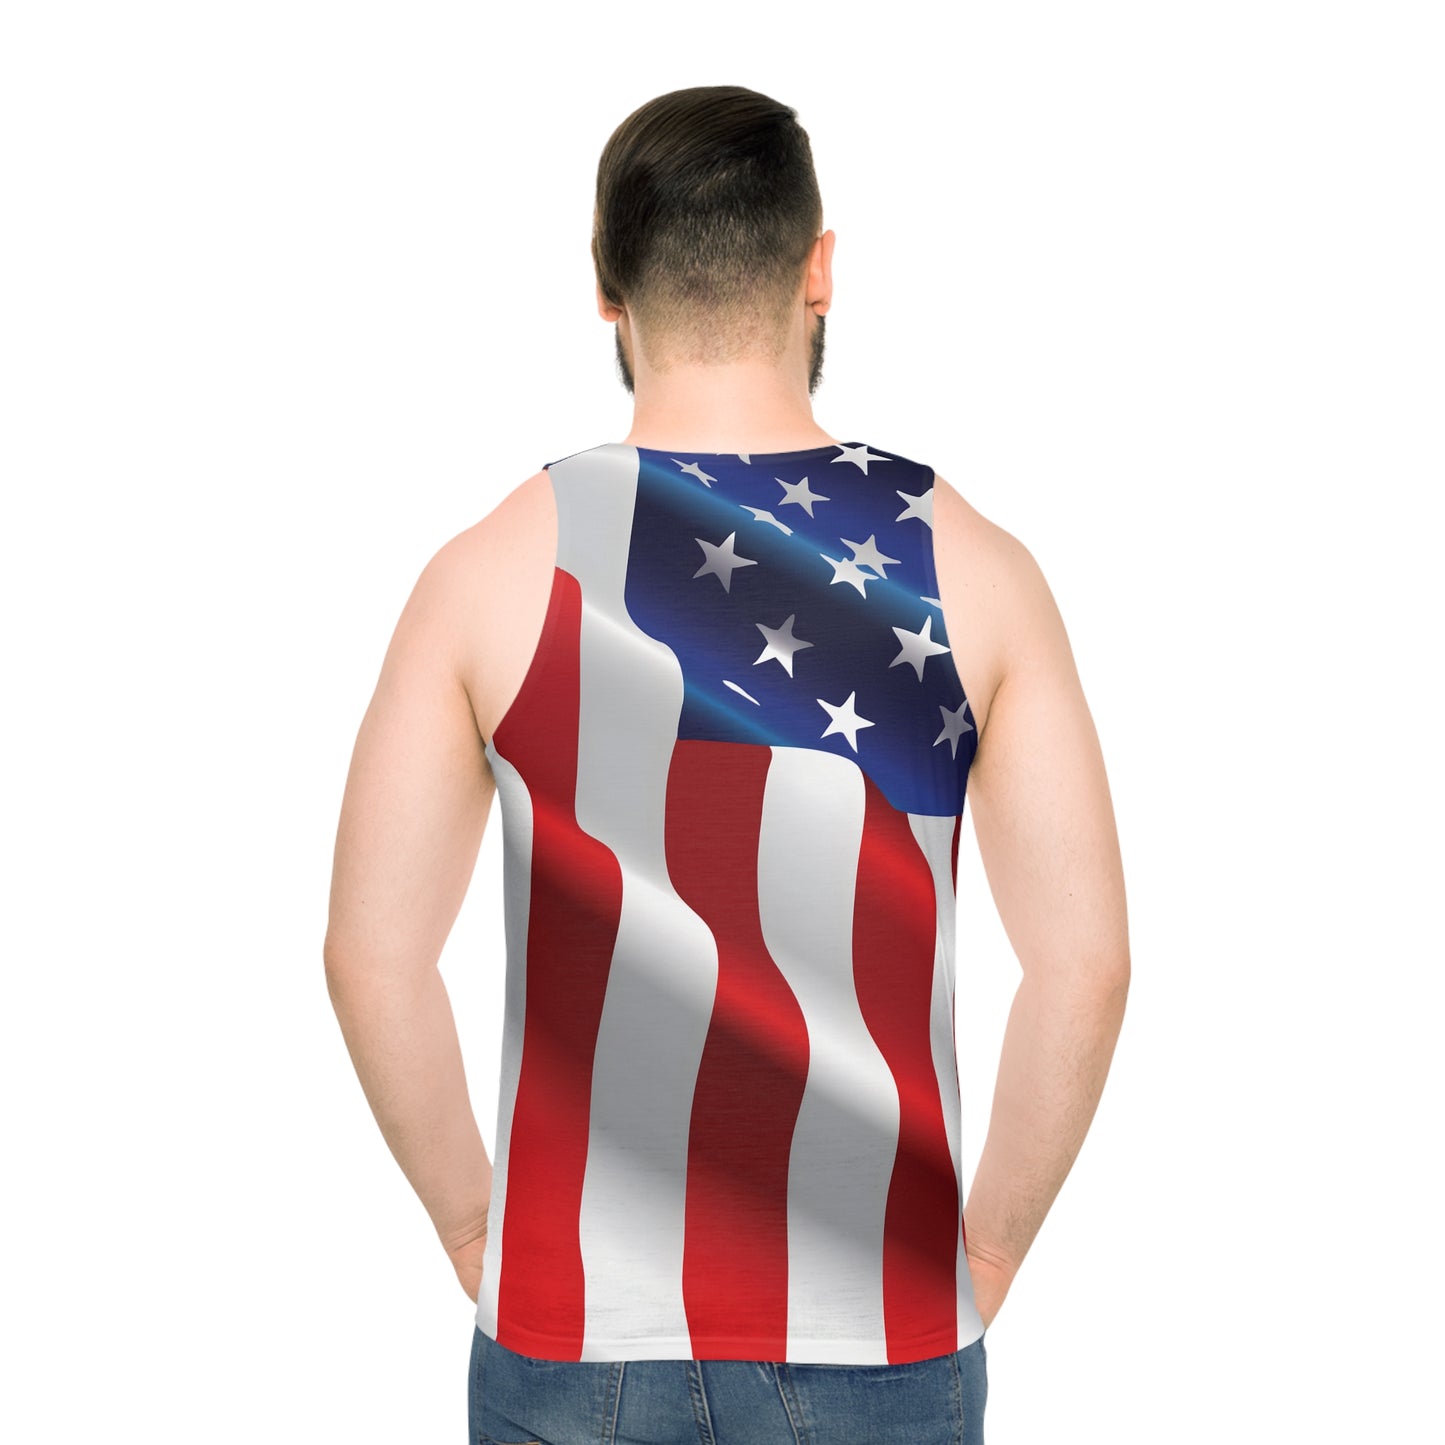 Kǎtōng Piàn - Prized Fighter Collection - America - 004 - Unisex Tank Top